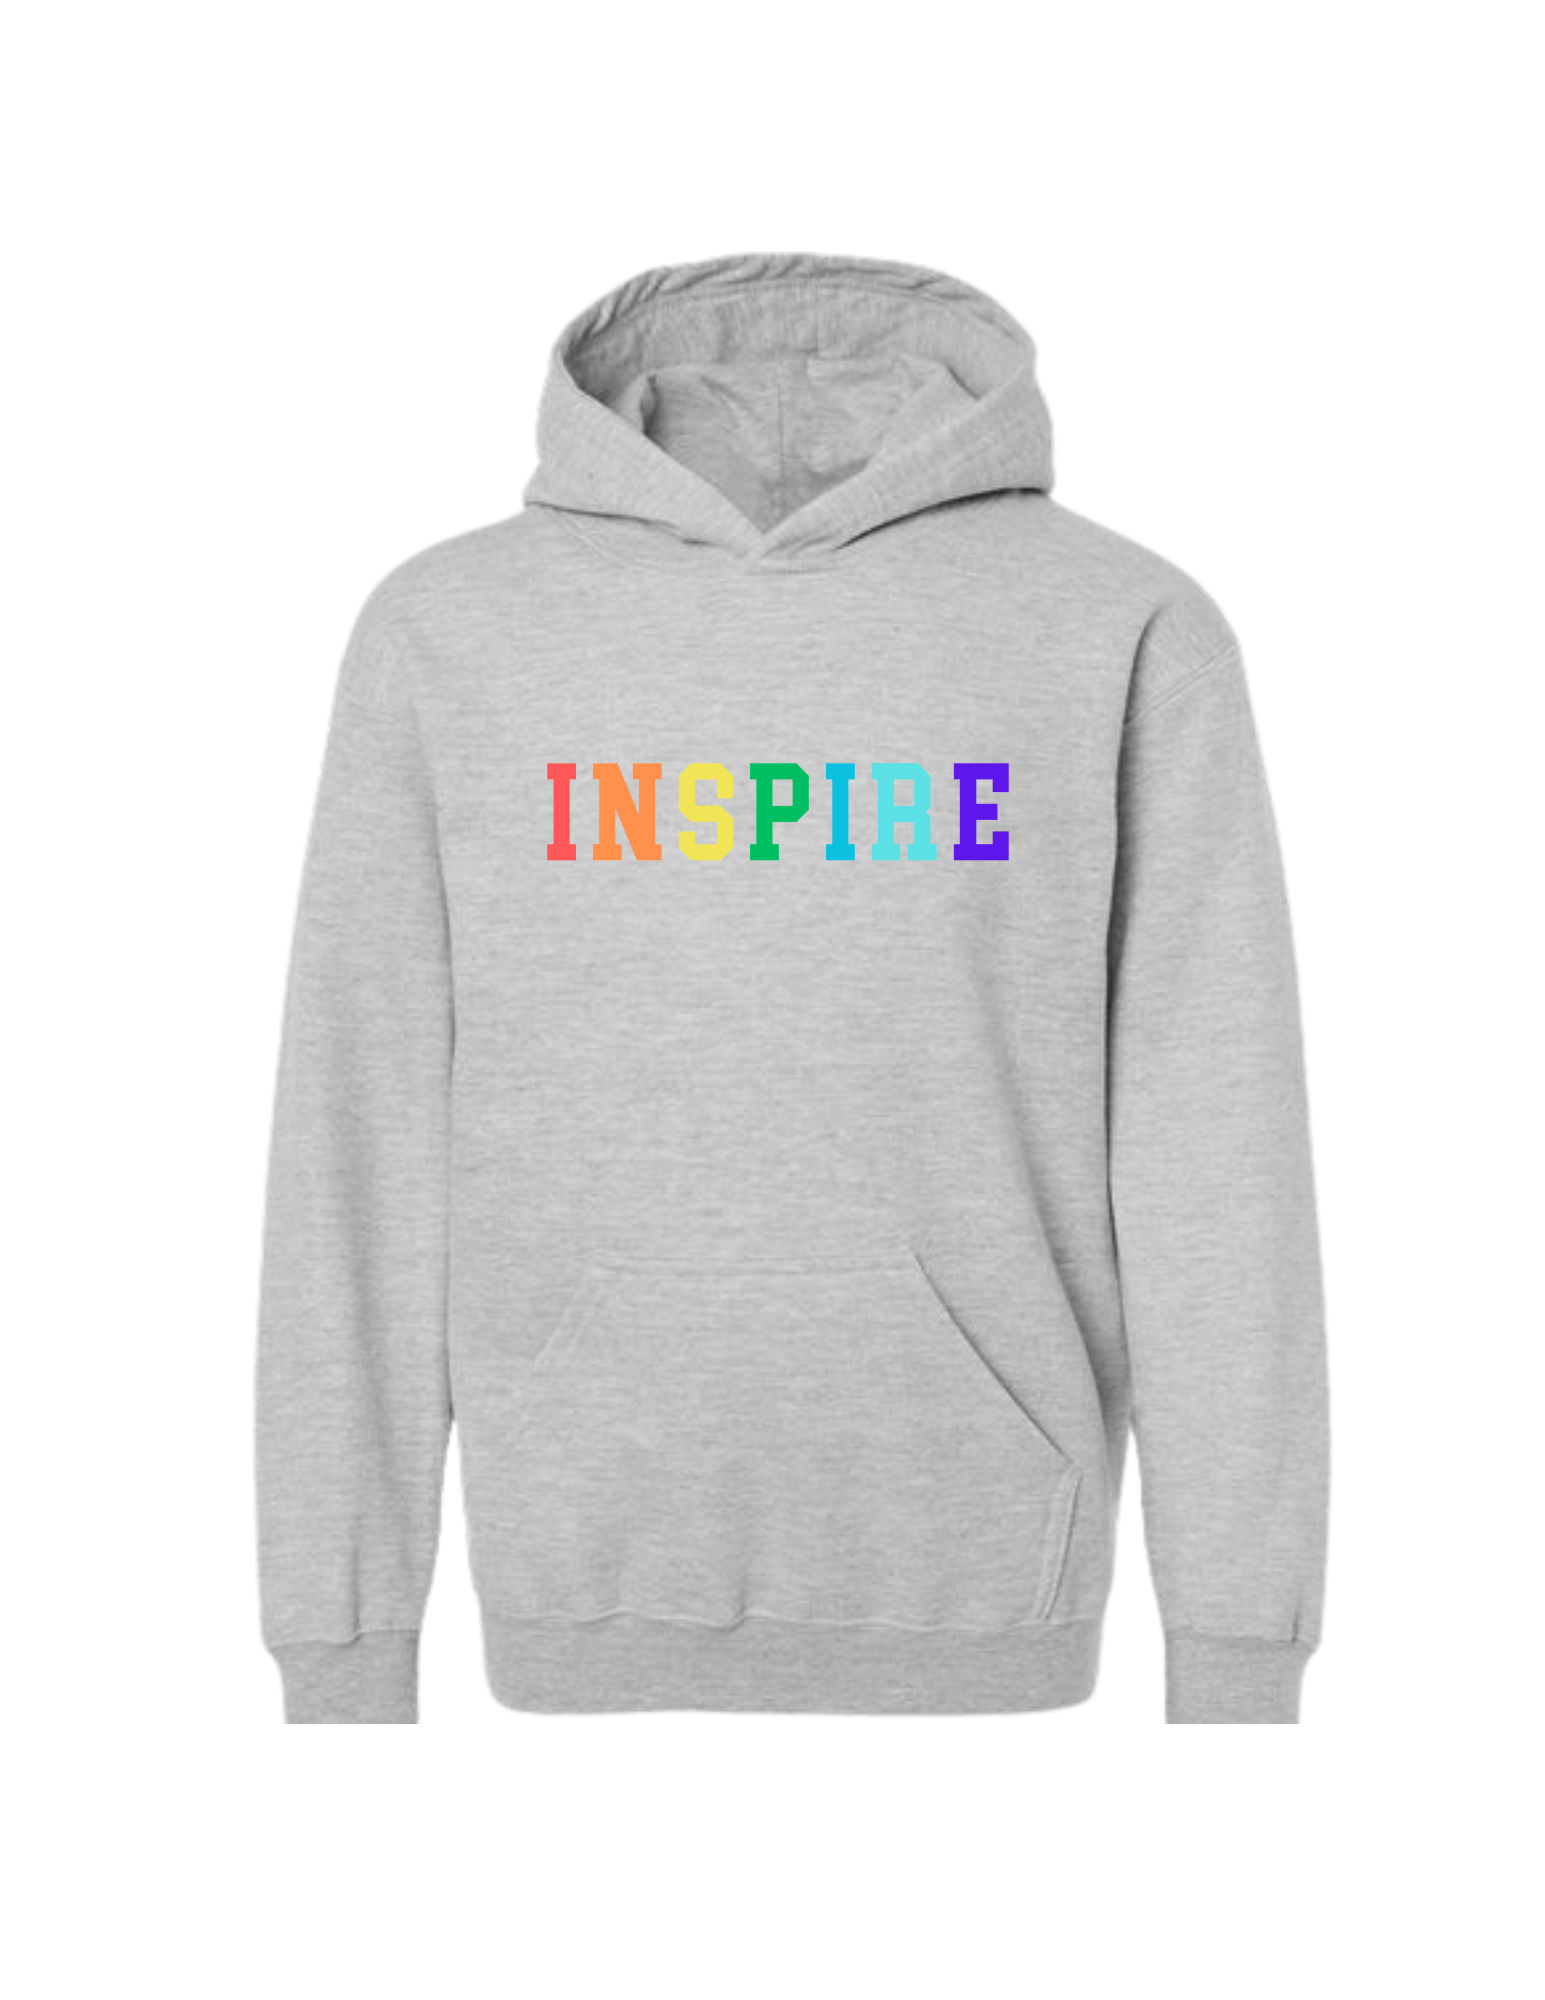 Inspire Colorful Gray Hoodie - Youth + Adult